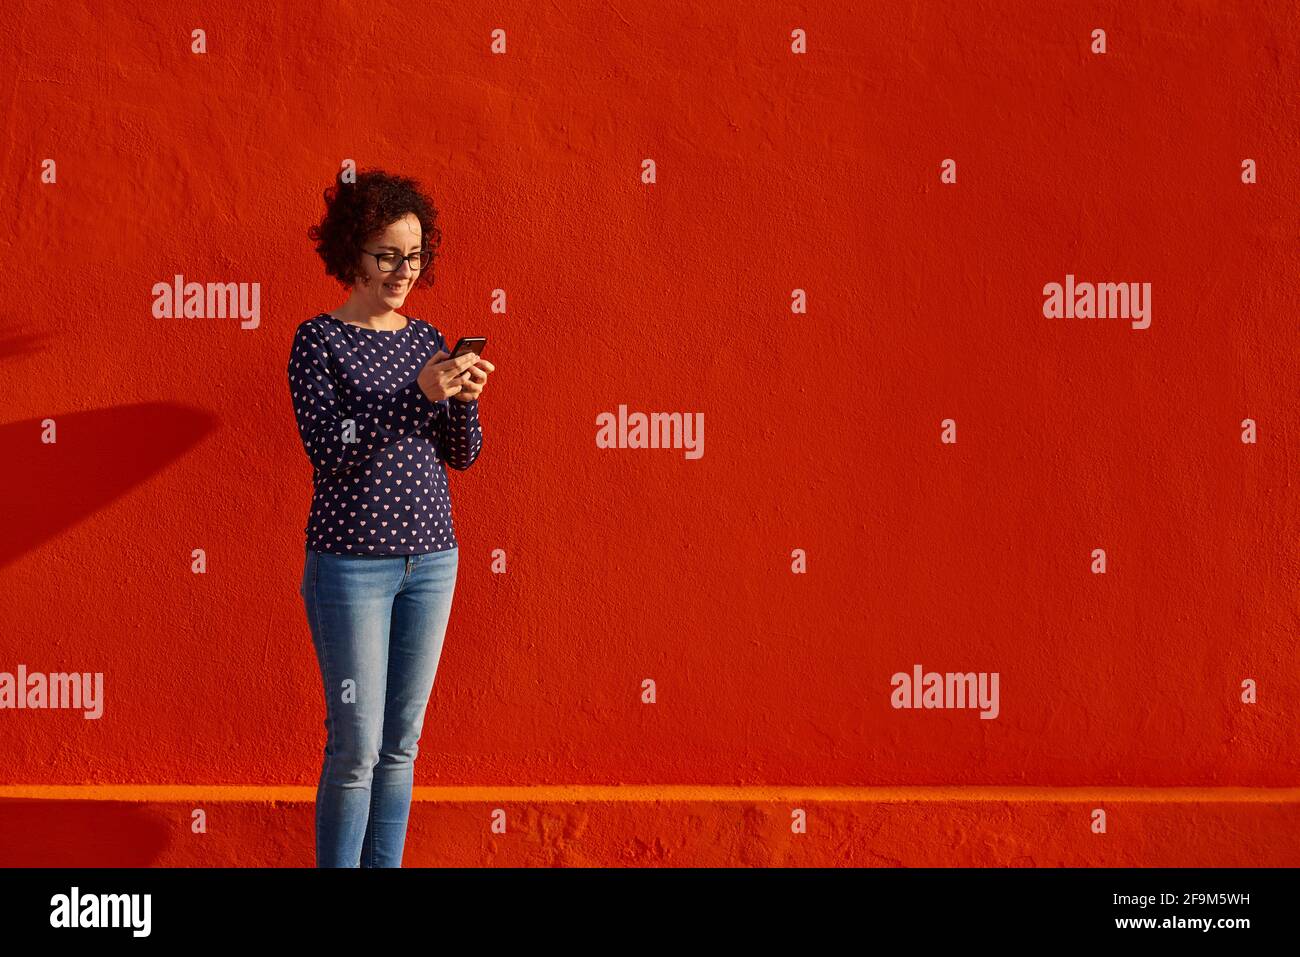 Front view of a happy woman standing against a bright red wall using her smartphone. High quality photo. Stock Photo